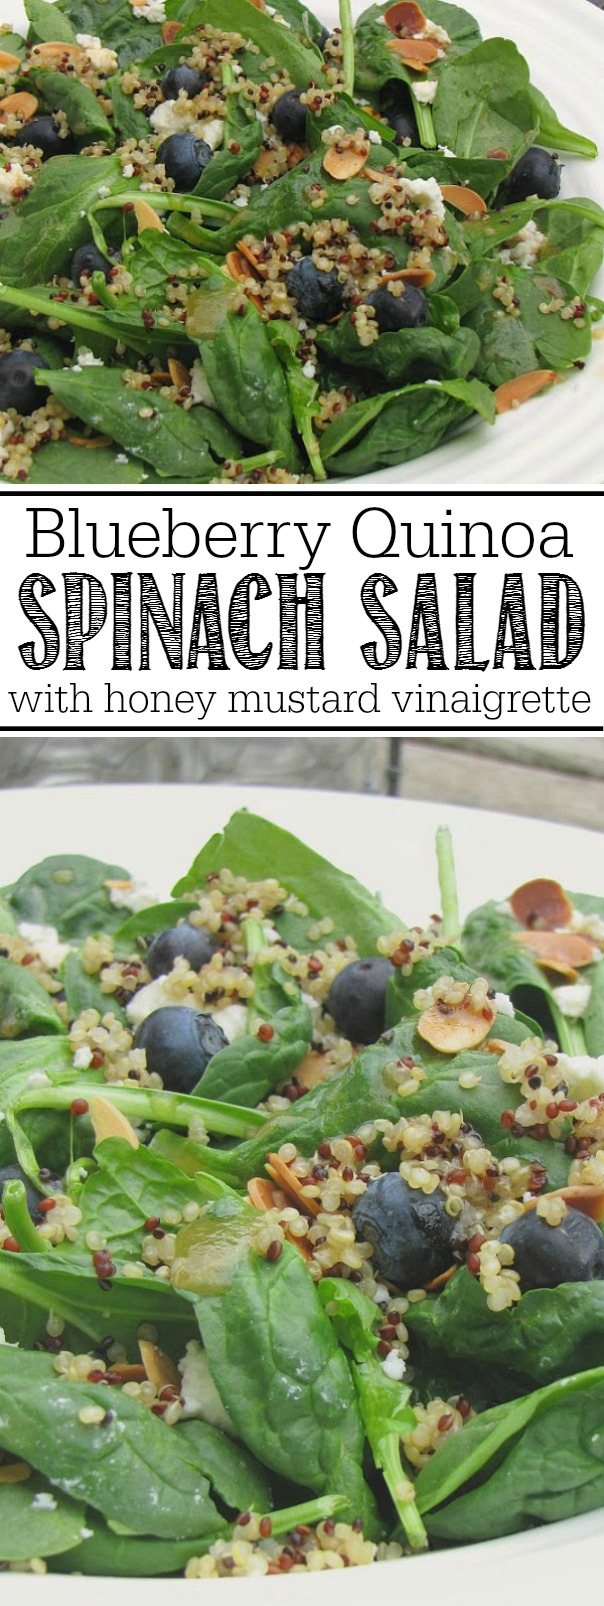 Healthy and delicious blueberry quinoa spinach salad with a honey mustard vinaigrette.